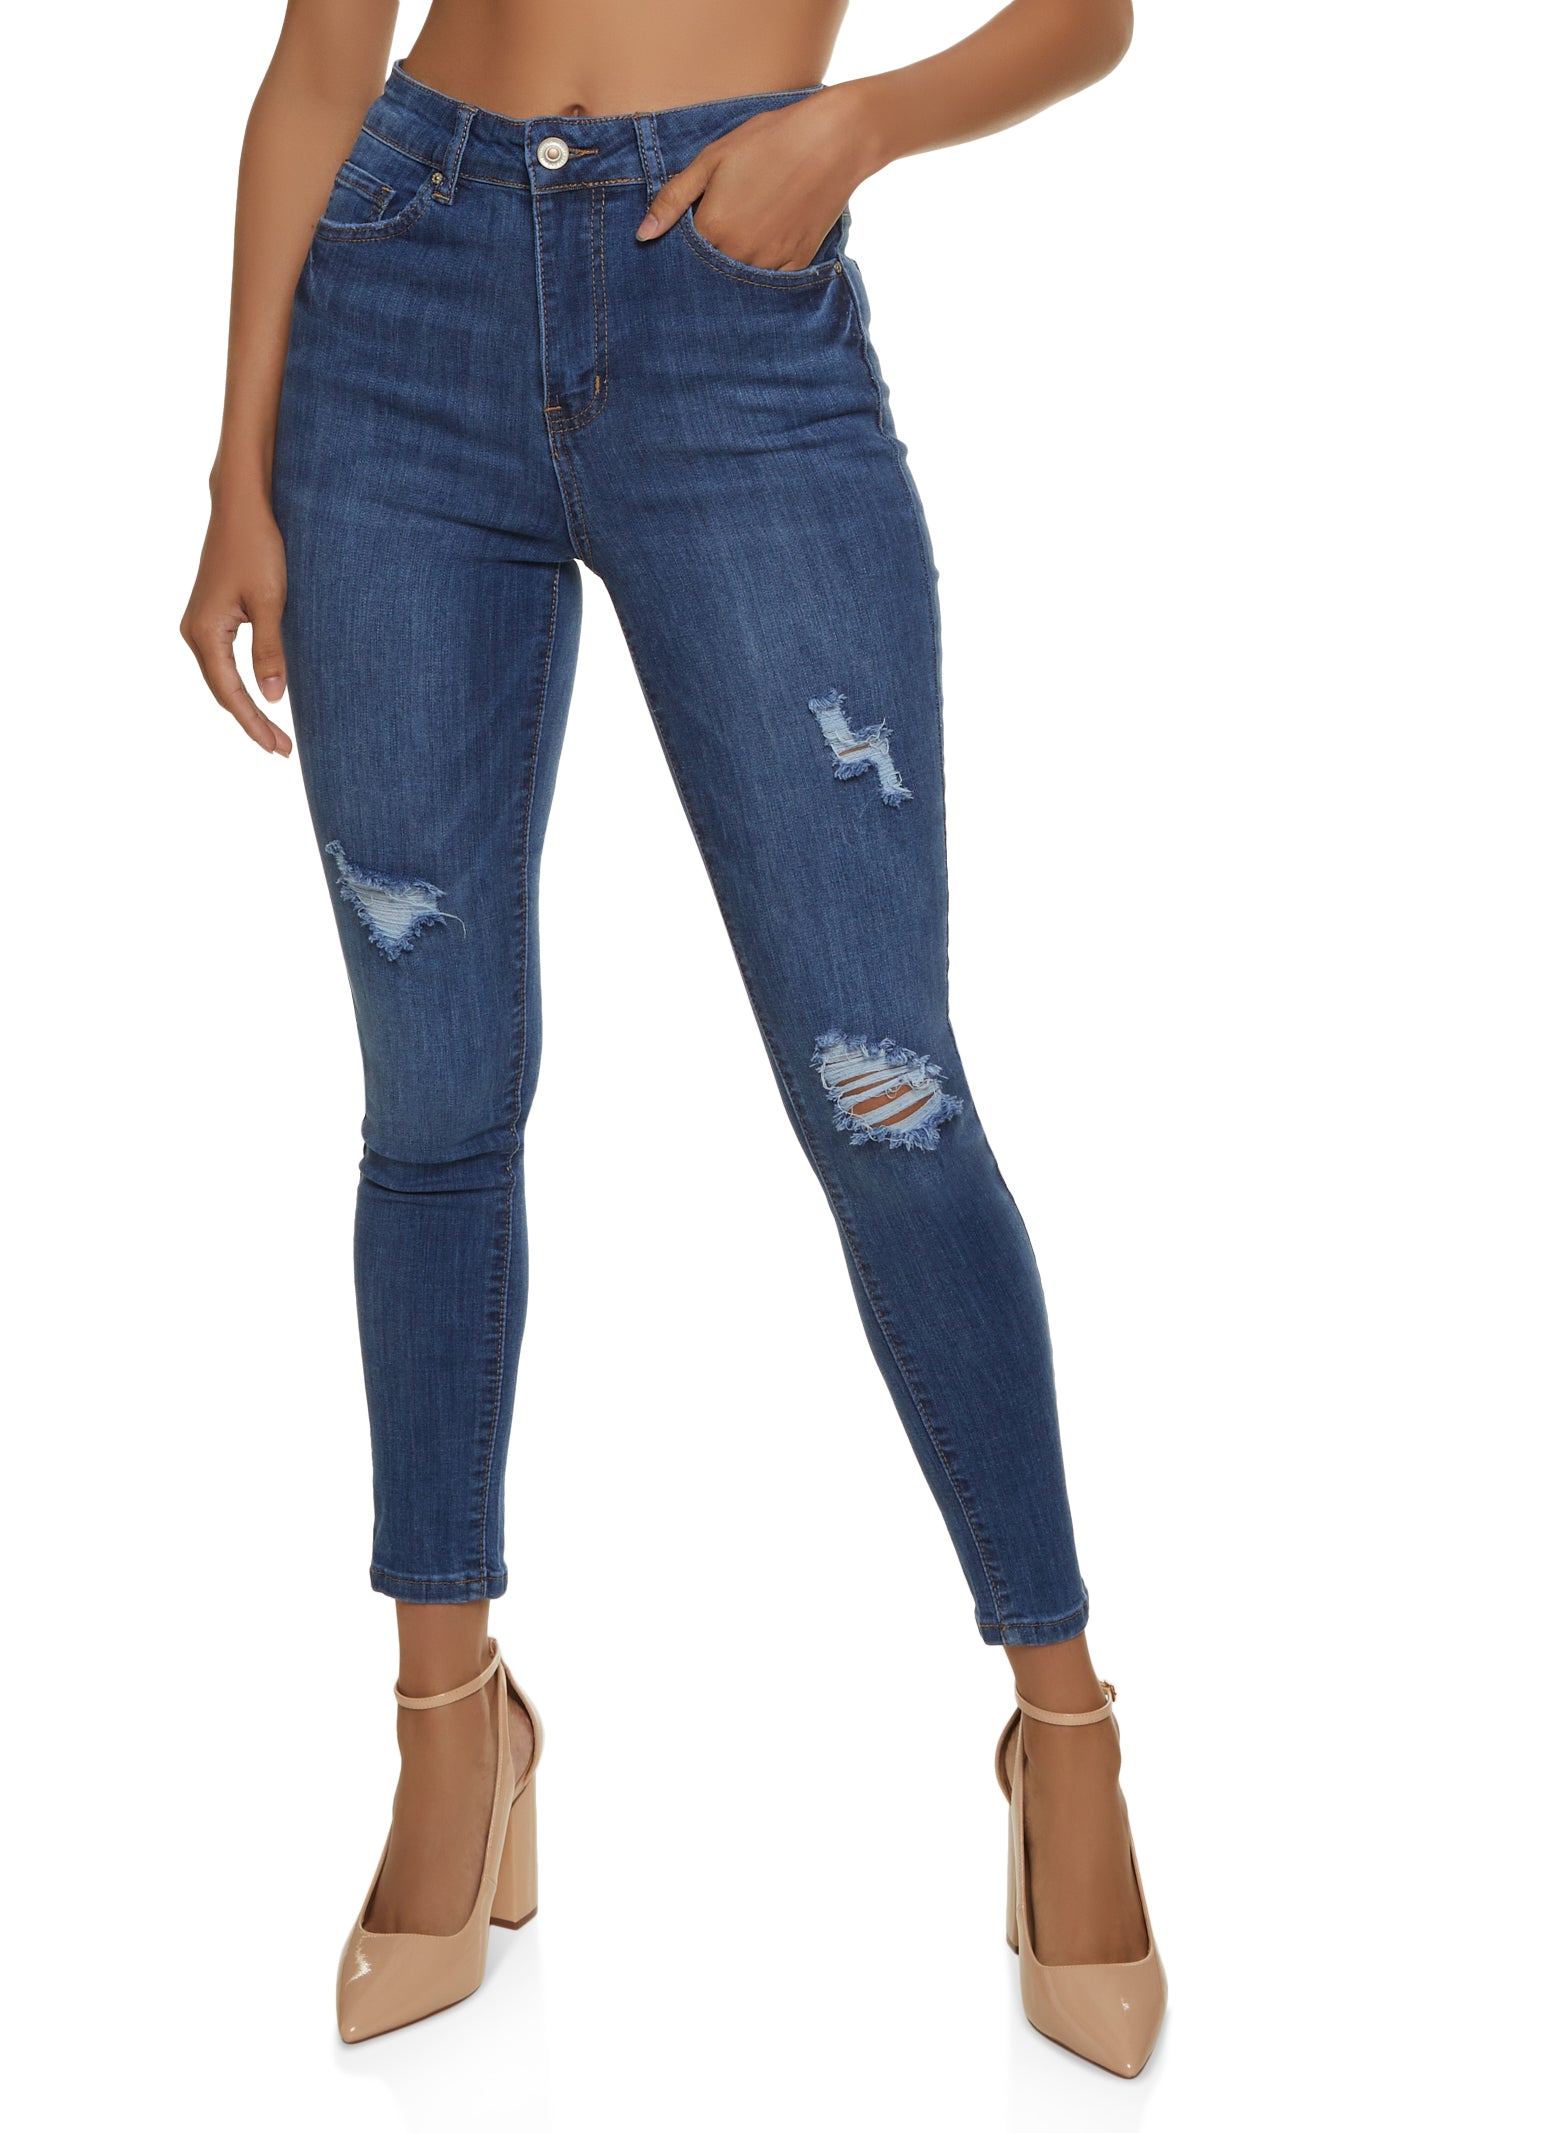 WAX Distressed High Waist Cropped Skinny Jeans